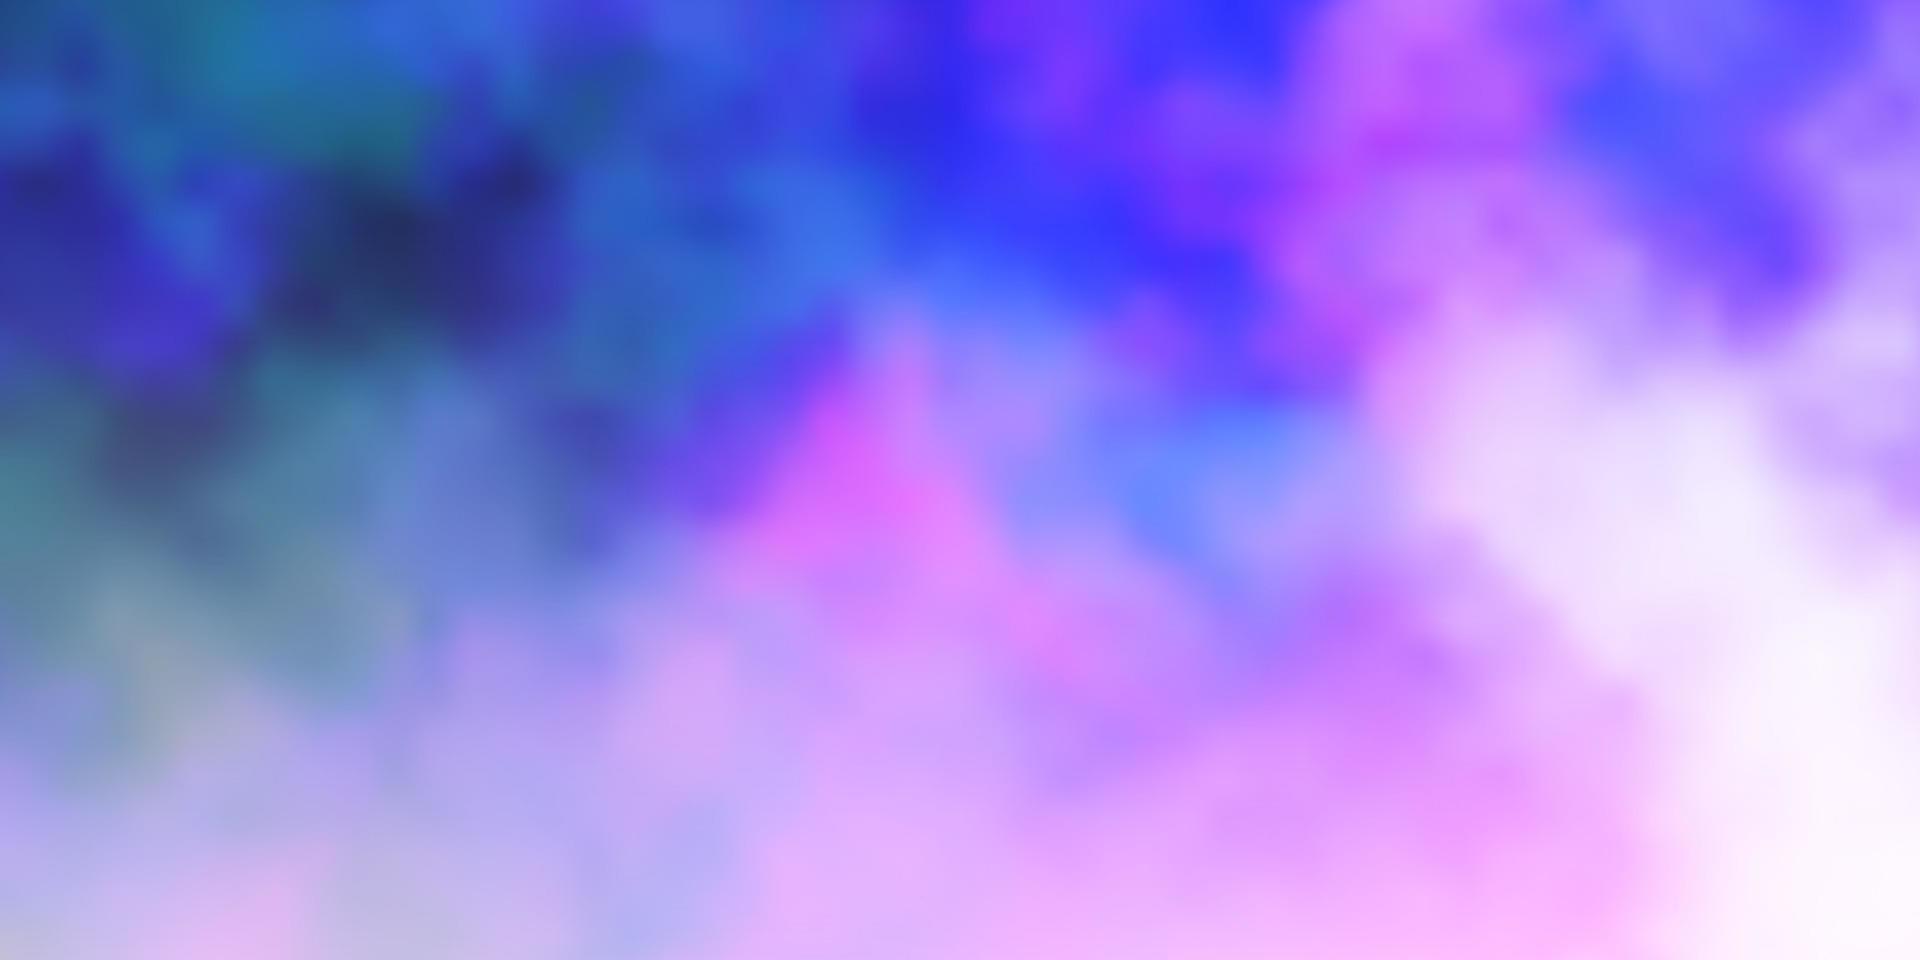 Light Purple, Pink vector background with clouds.